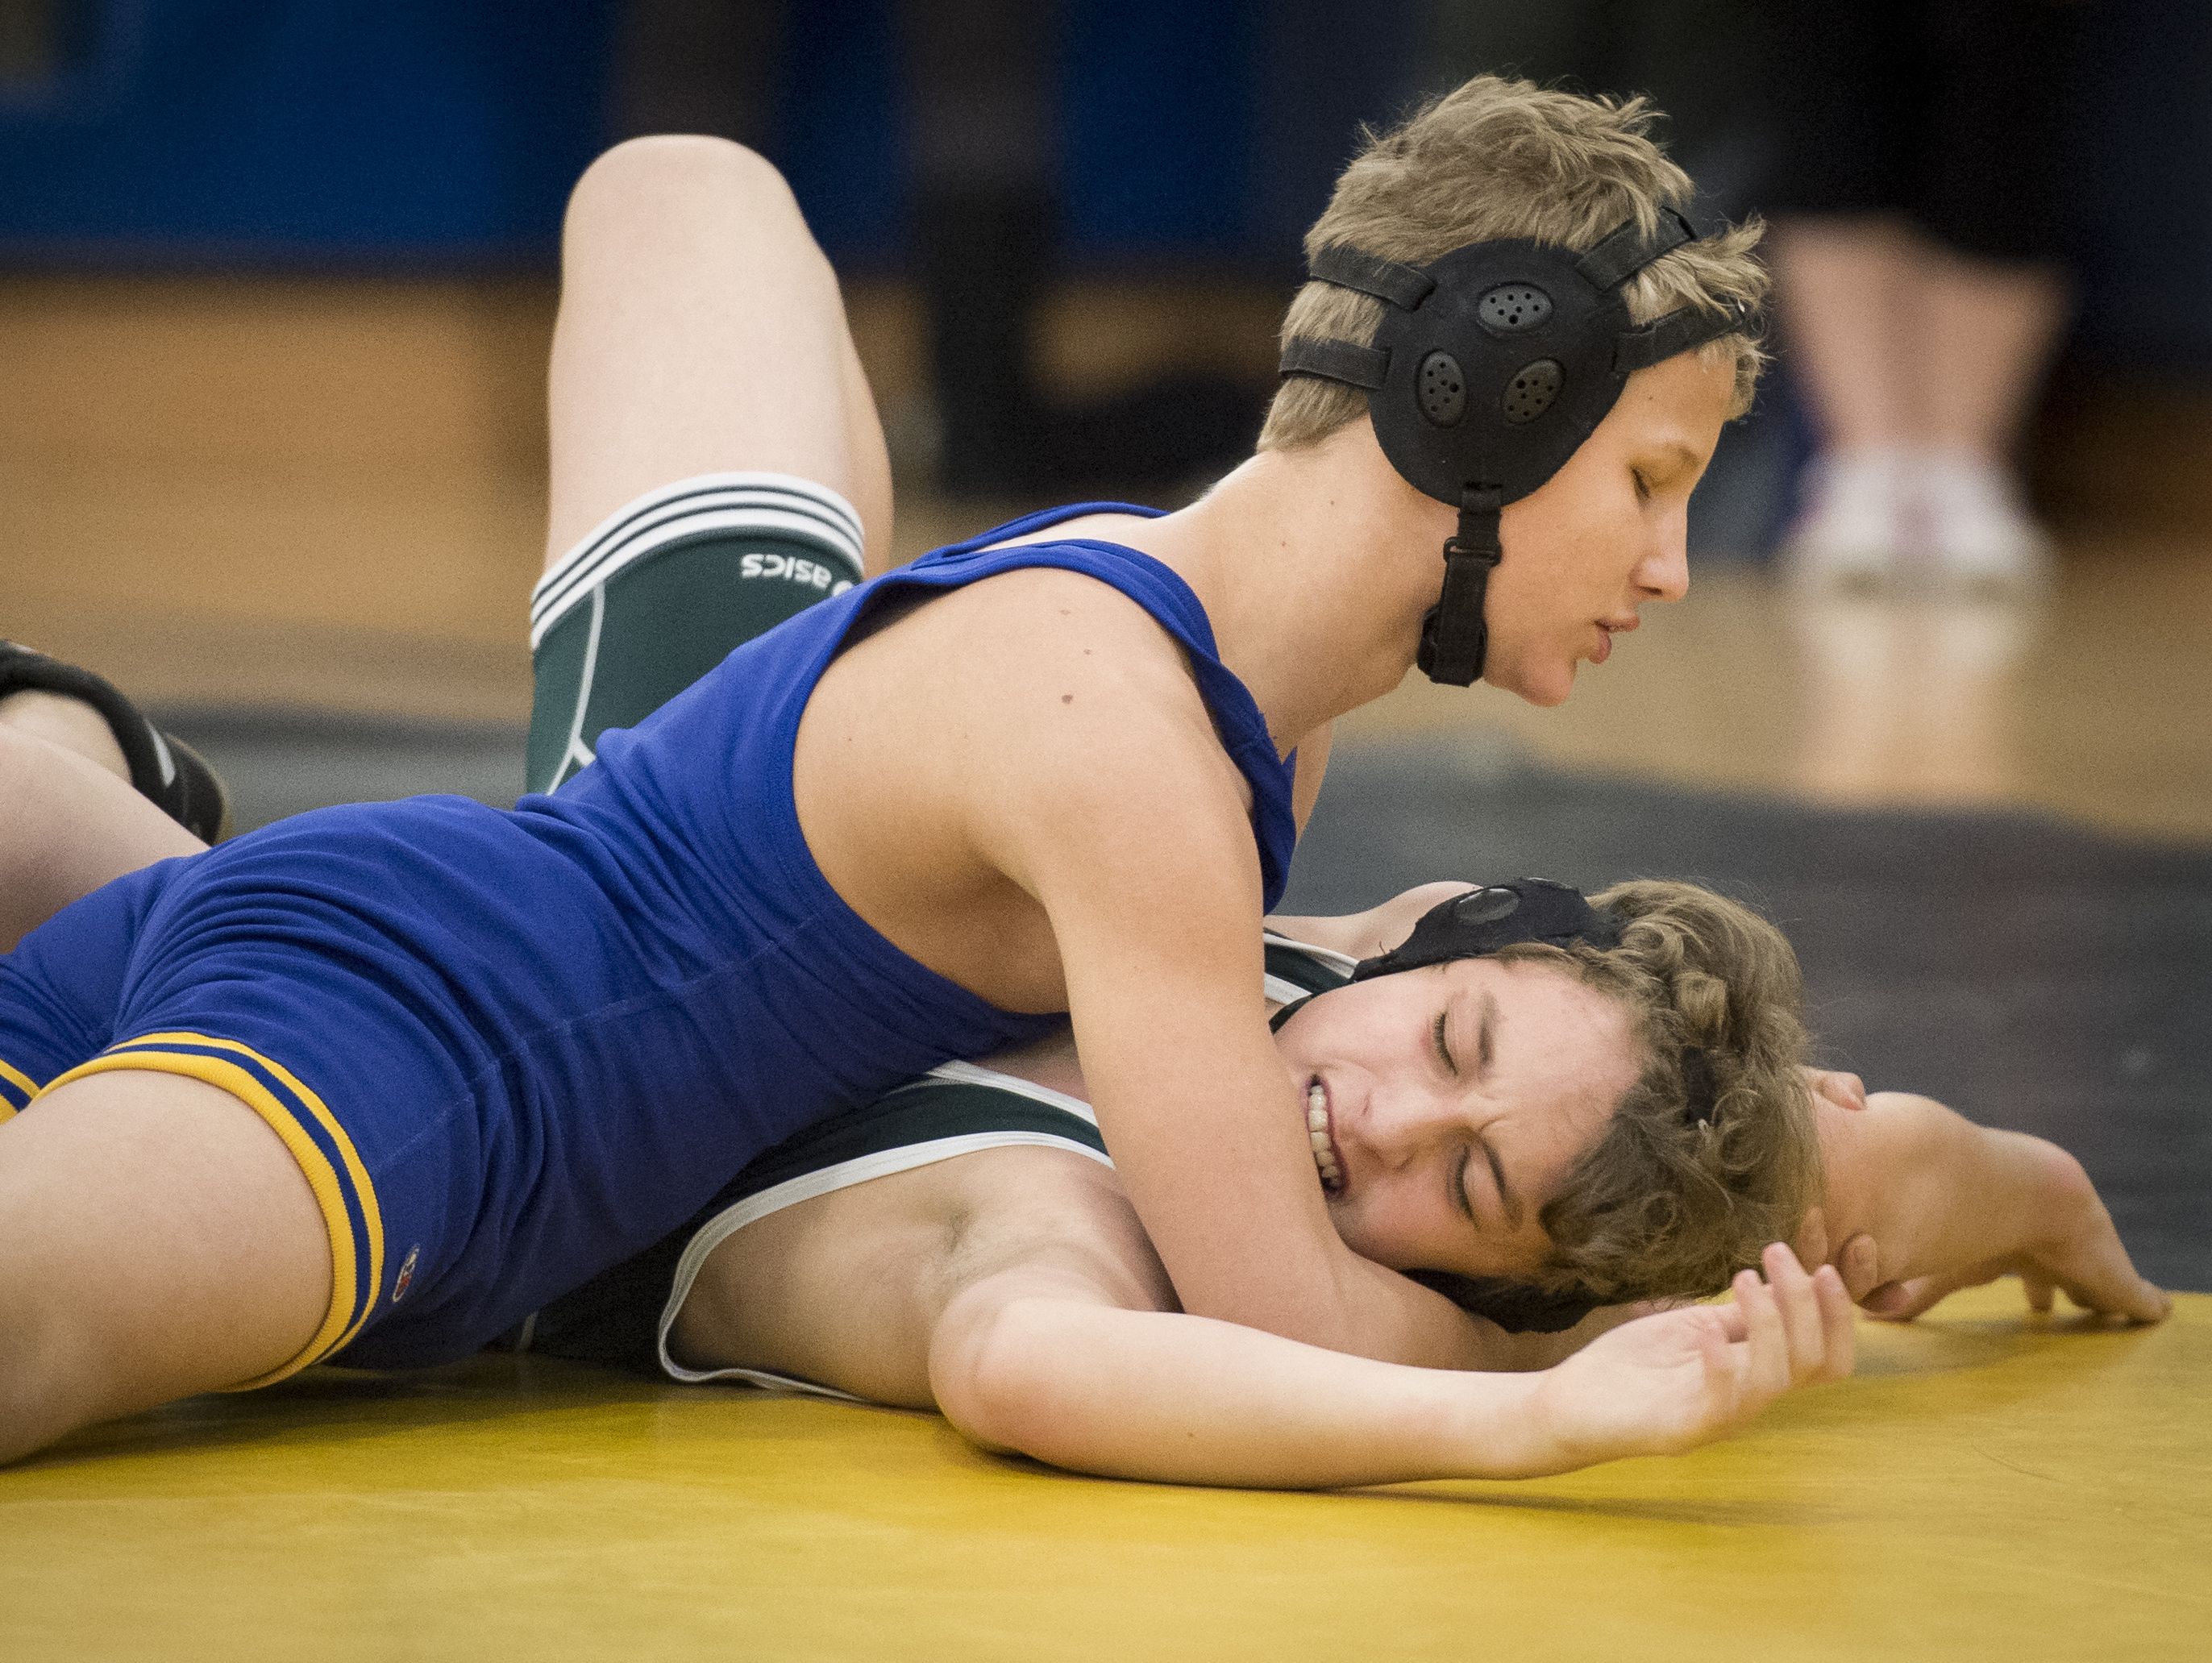 Tennessee School for Blind wrestlers thrive on sport's lessons | USA ...